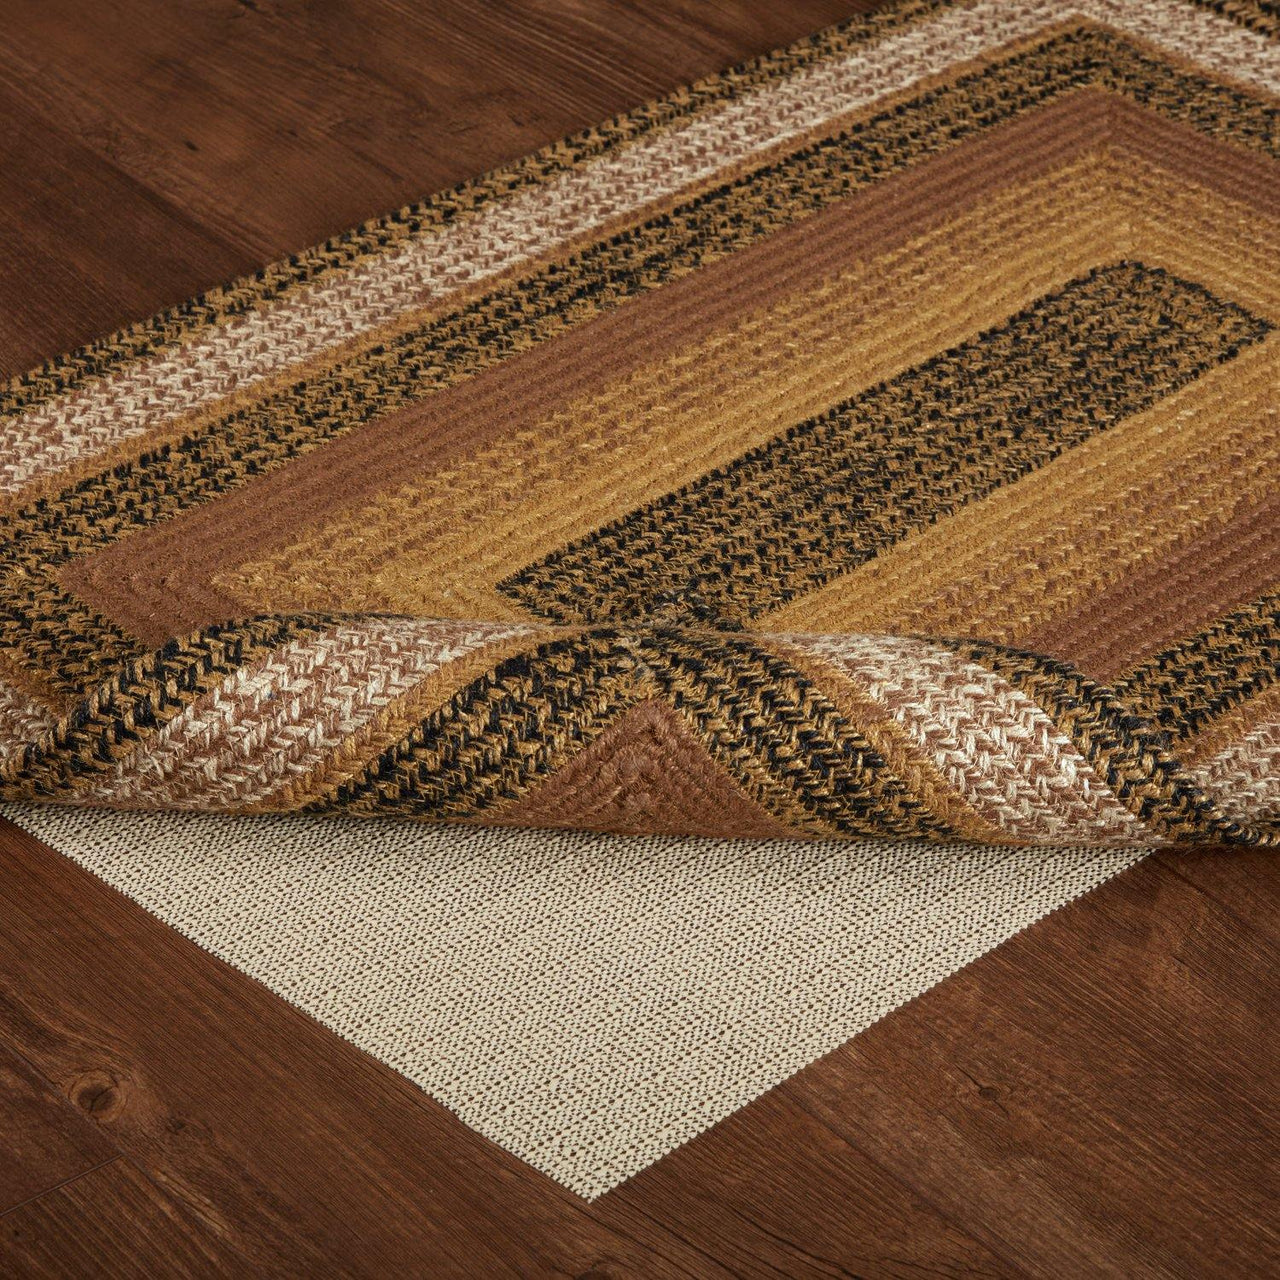 Kettle Grove Jute Braided Rug Rect 24"x36" with Rug Pad VHC Brands - The Fox Decor